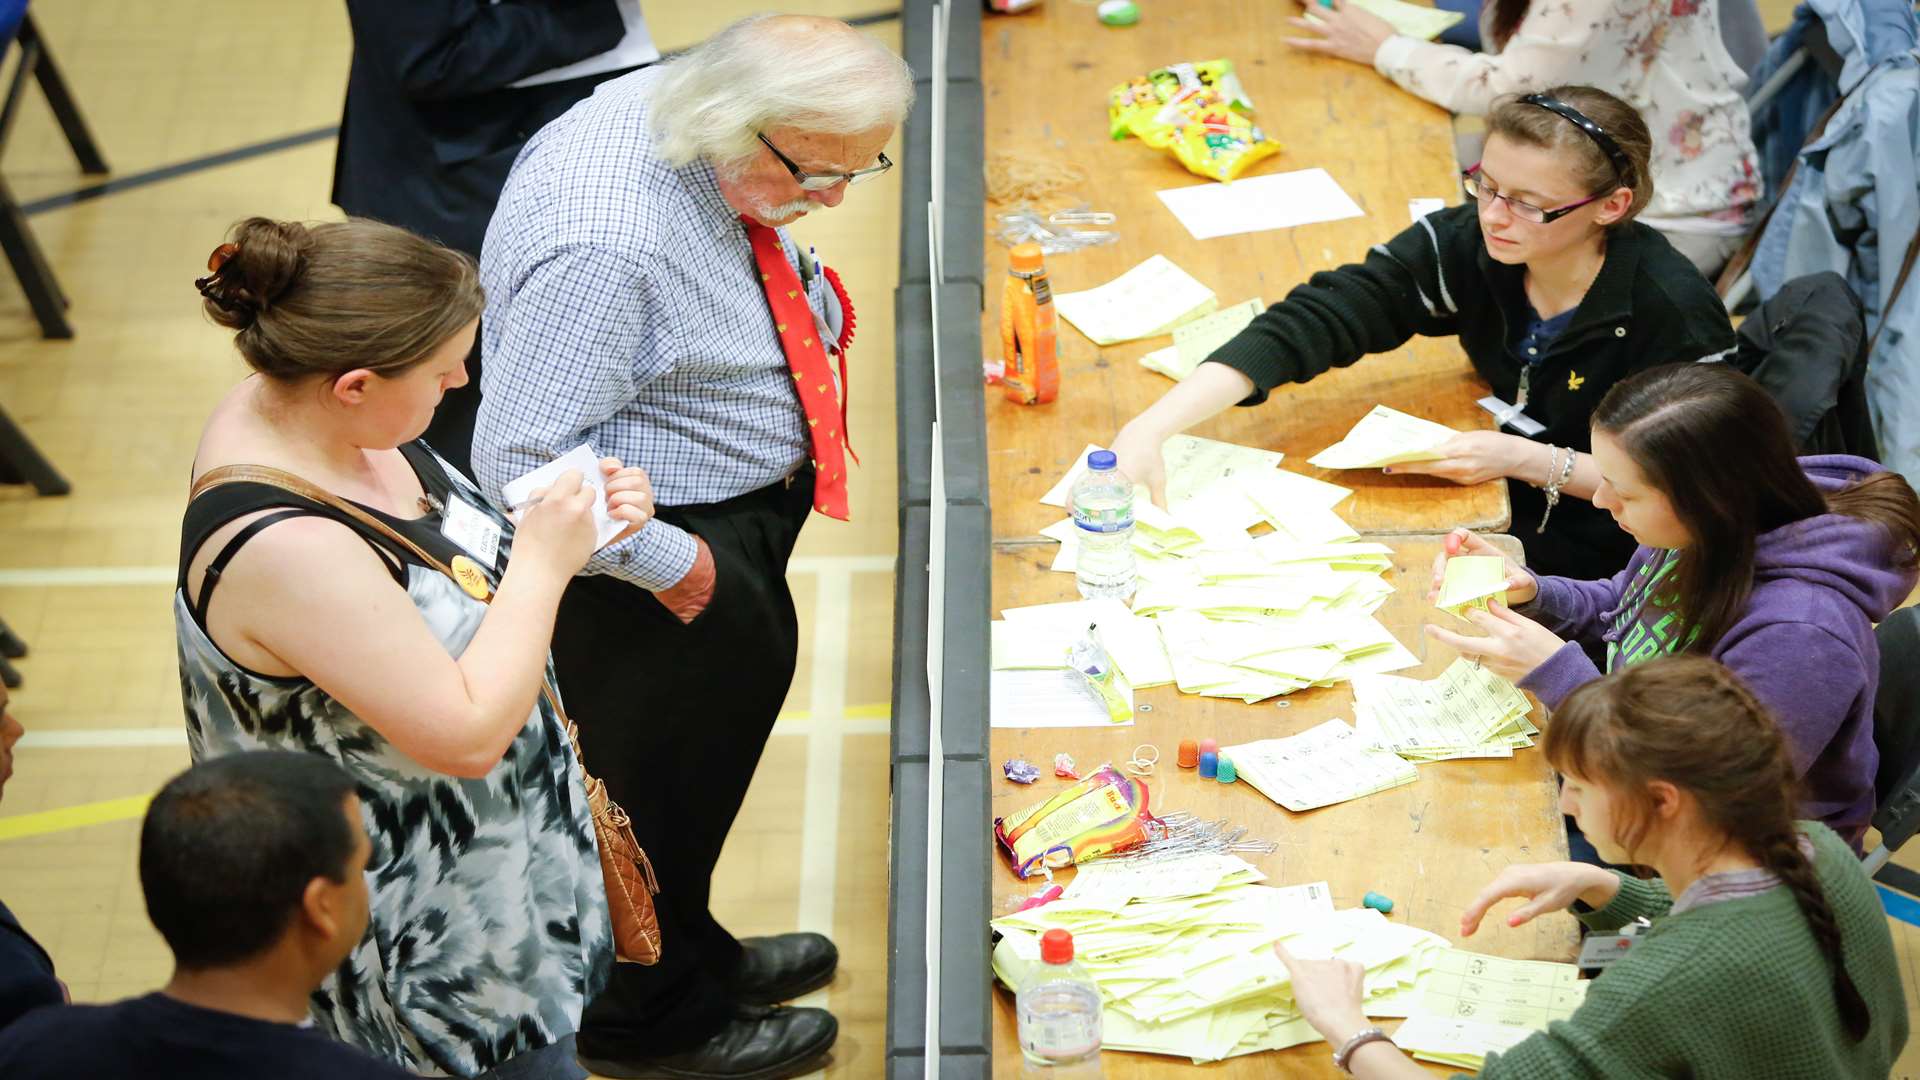 Ballot papers being scrutinised